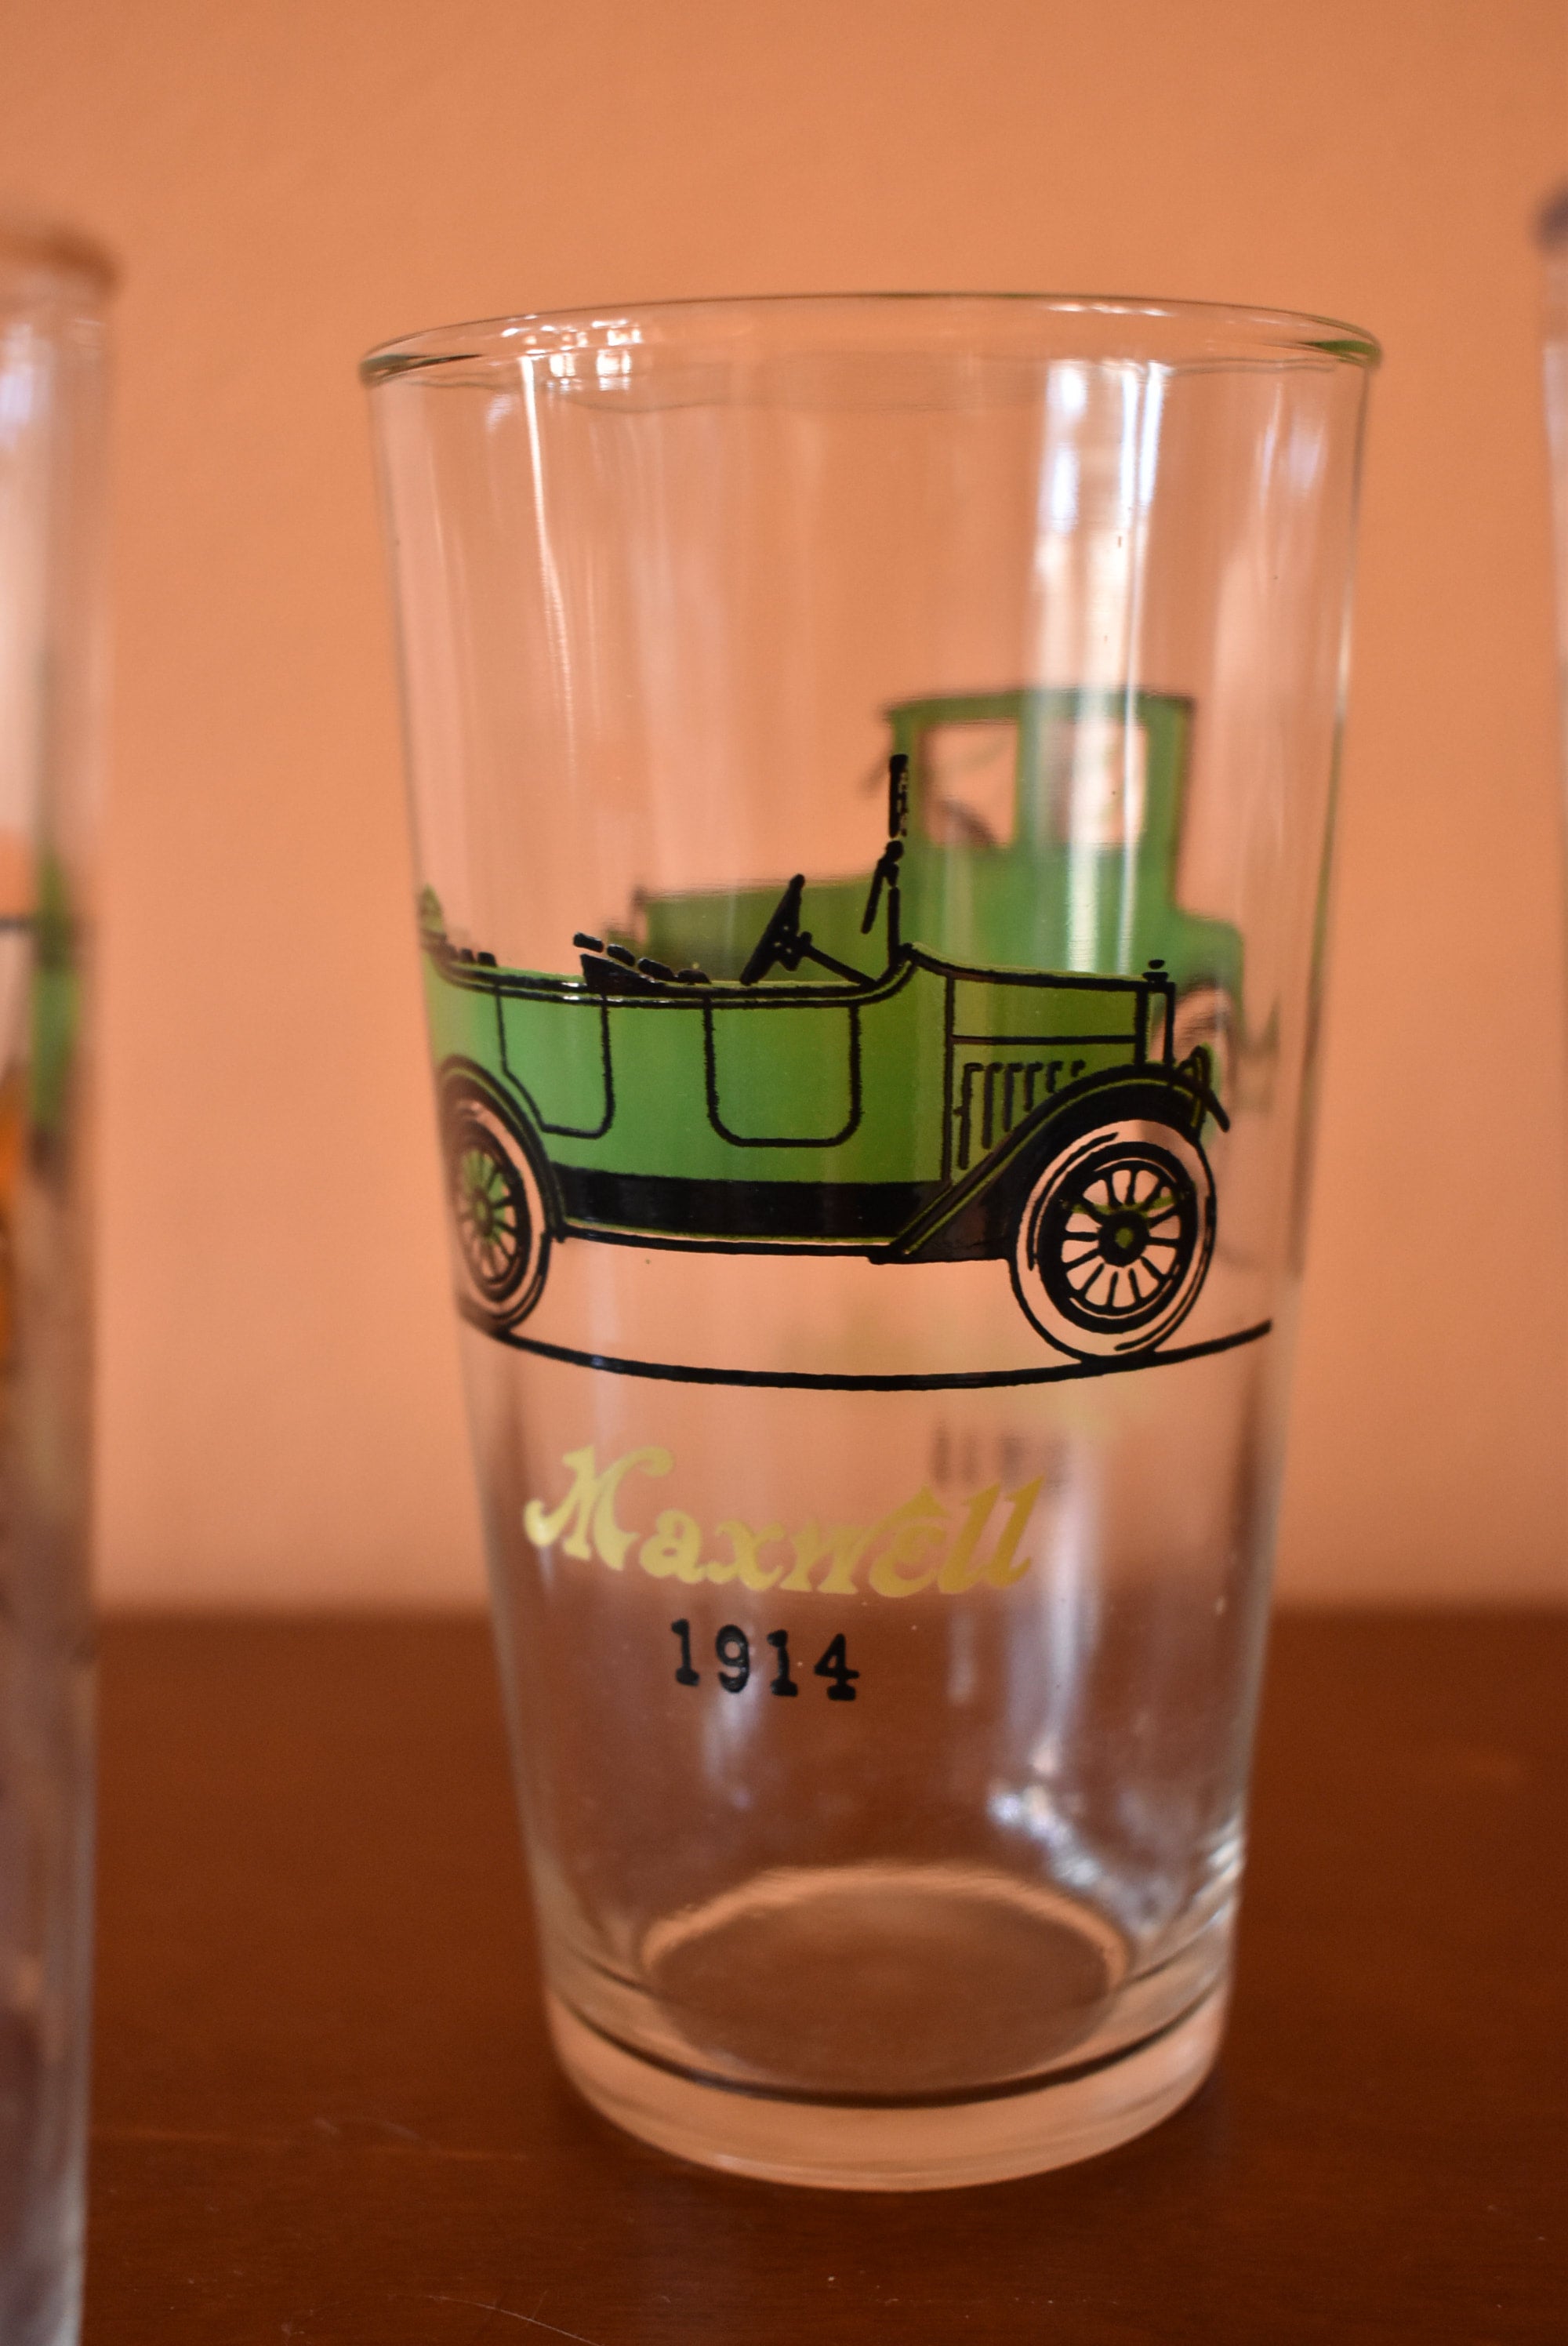 Vintage Barware: 6p Set 1960s Antique Car Hot Toddy Glass Mugs Really Cool!  PE49